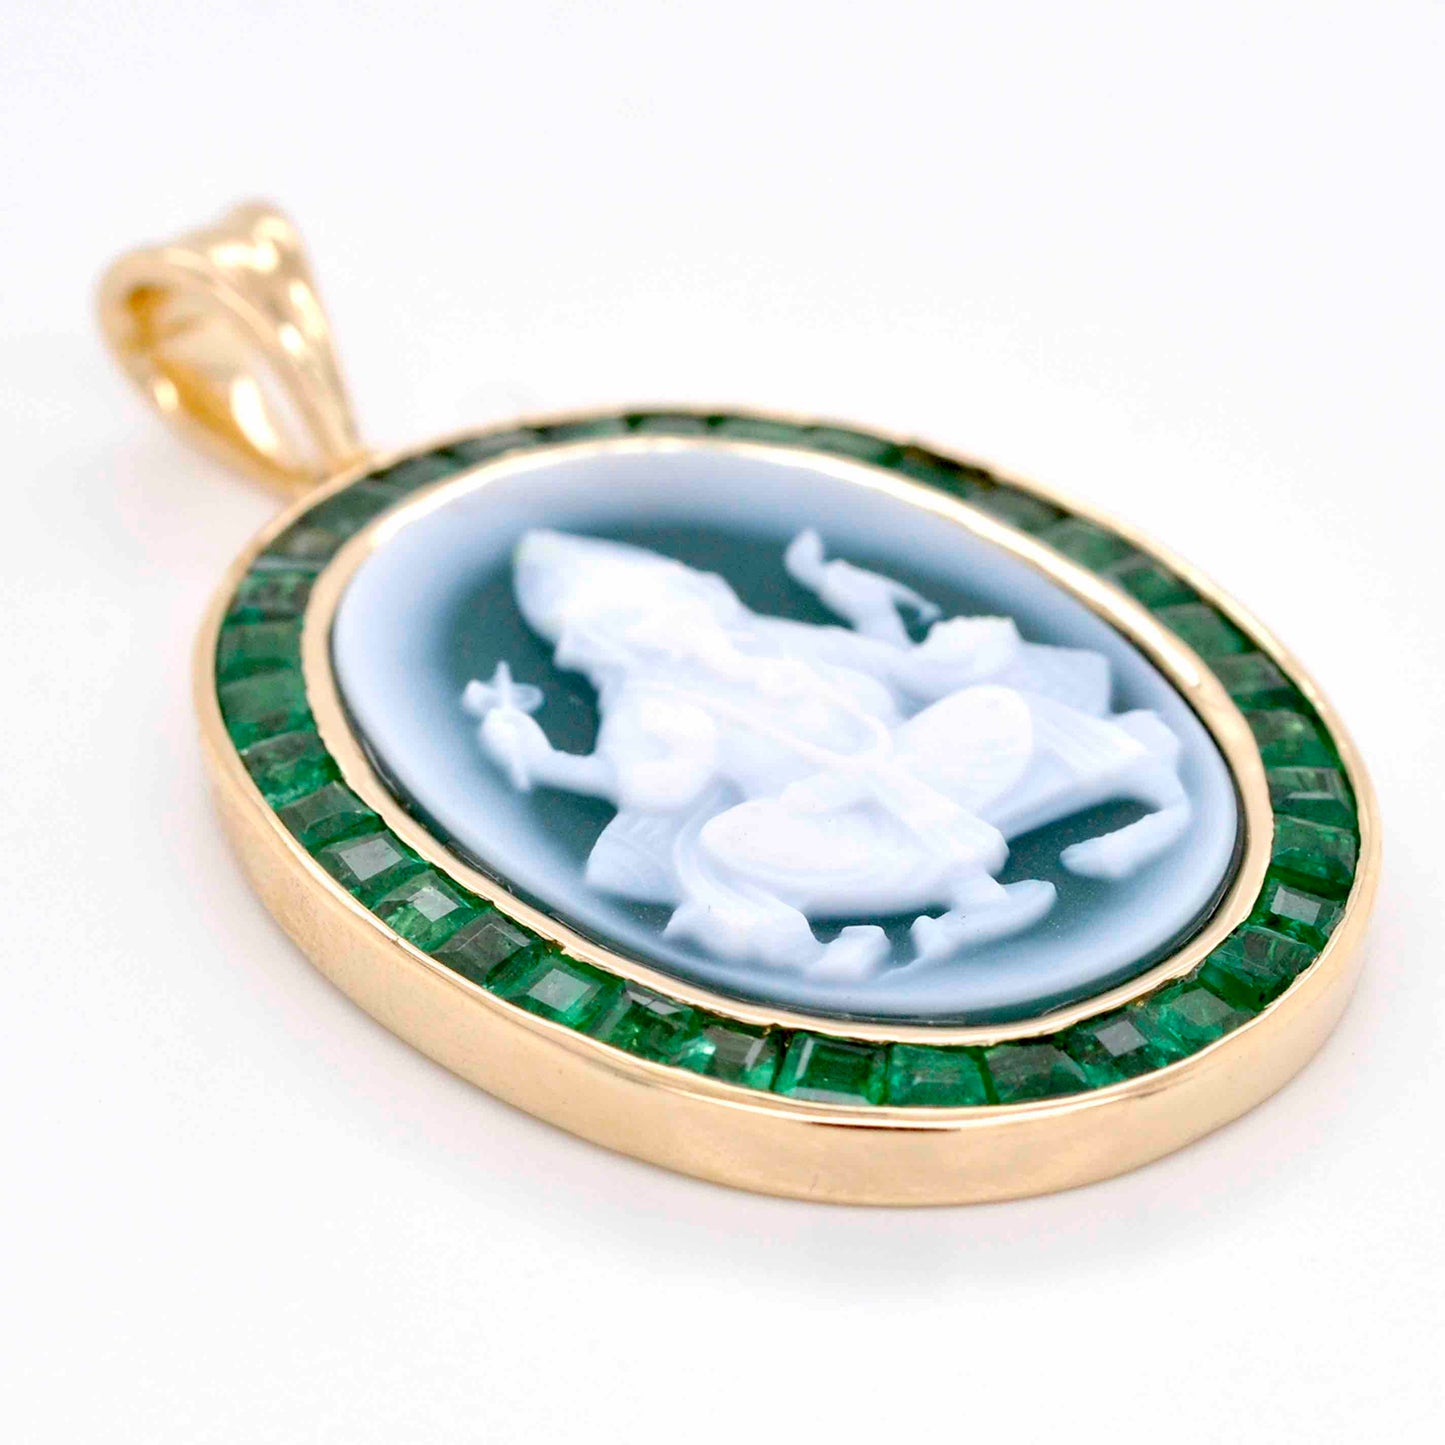 Cameo carving pendant